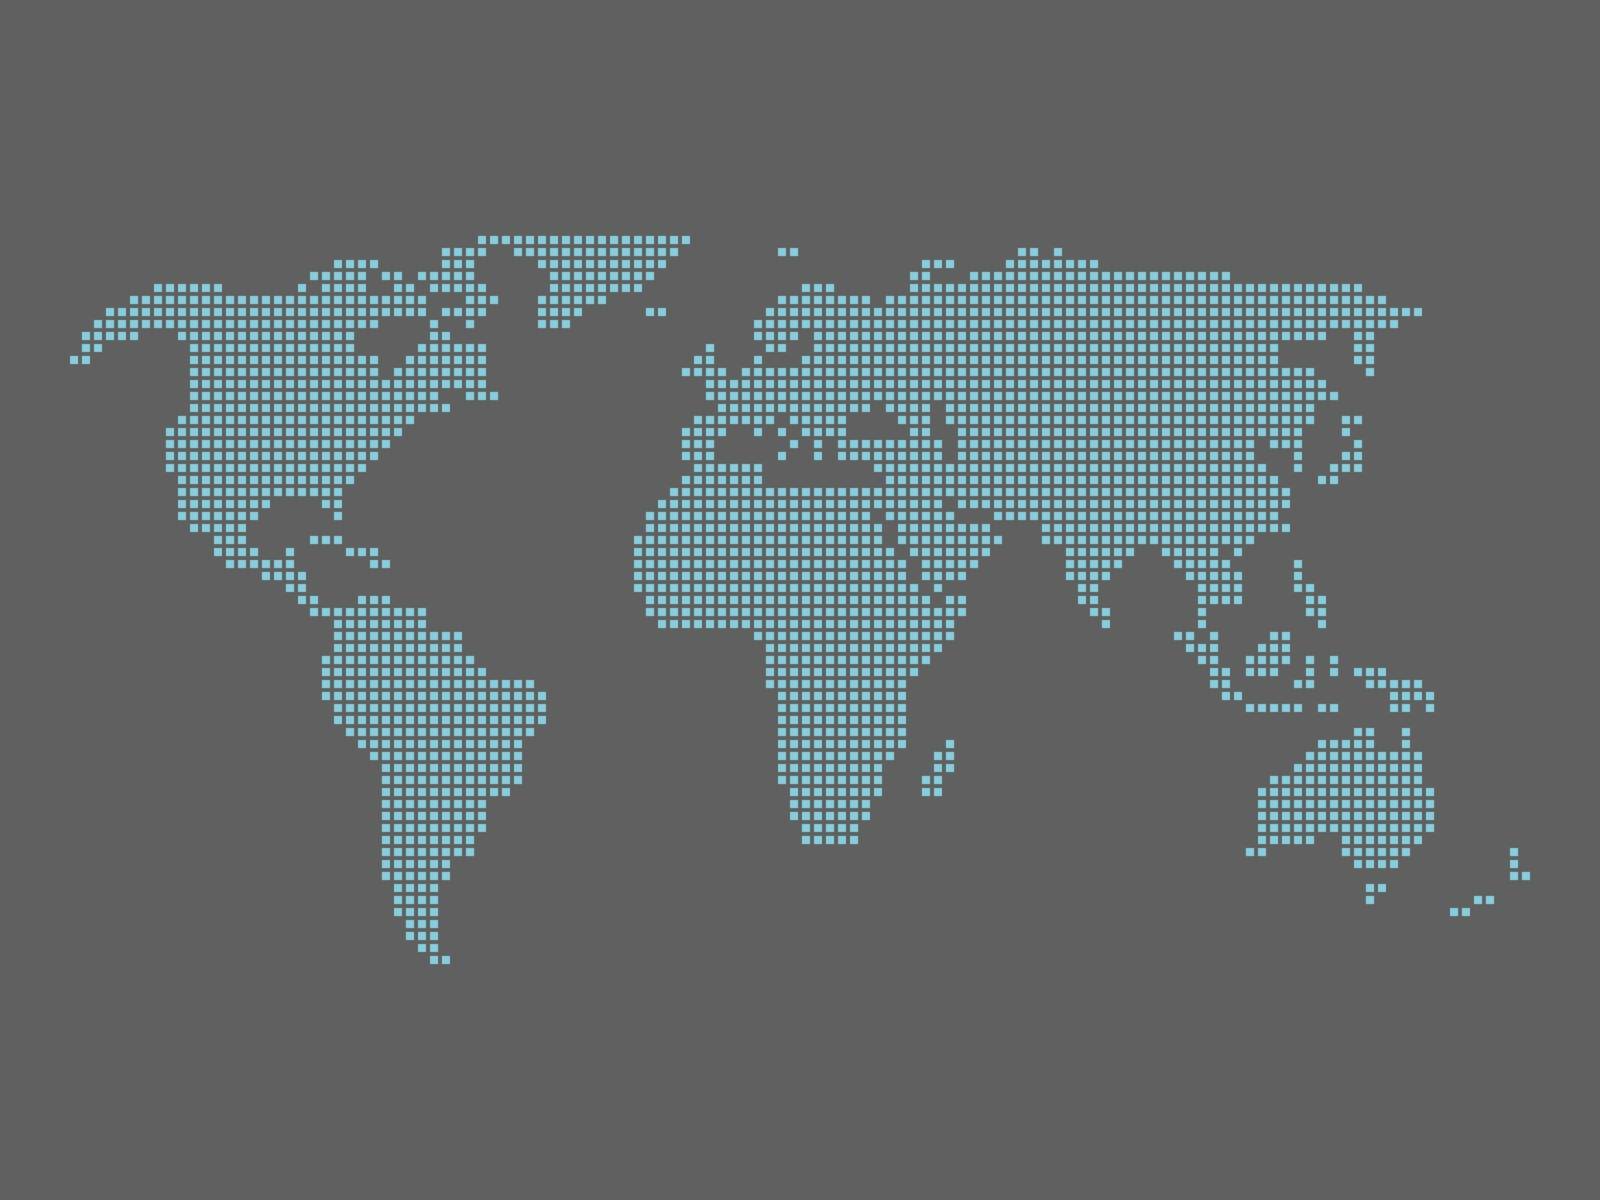 World map tiled by small blue squares on dark grey background.